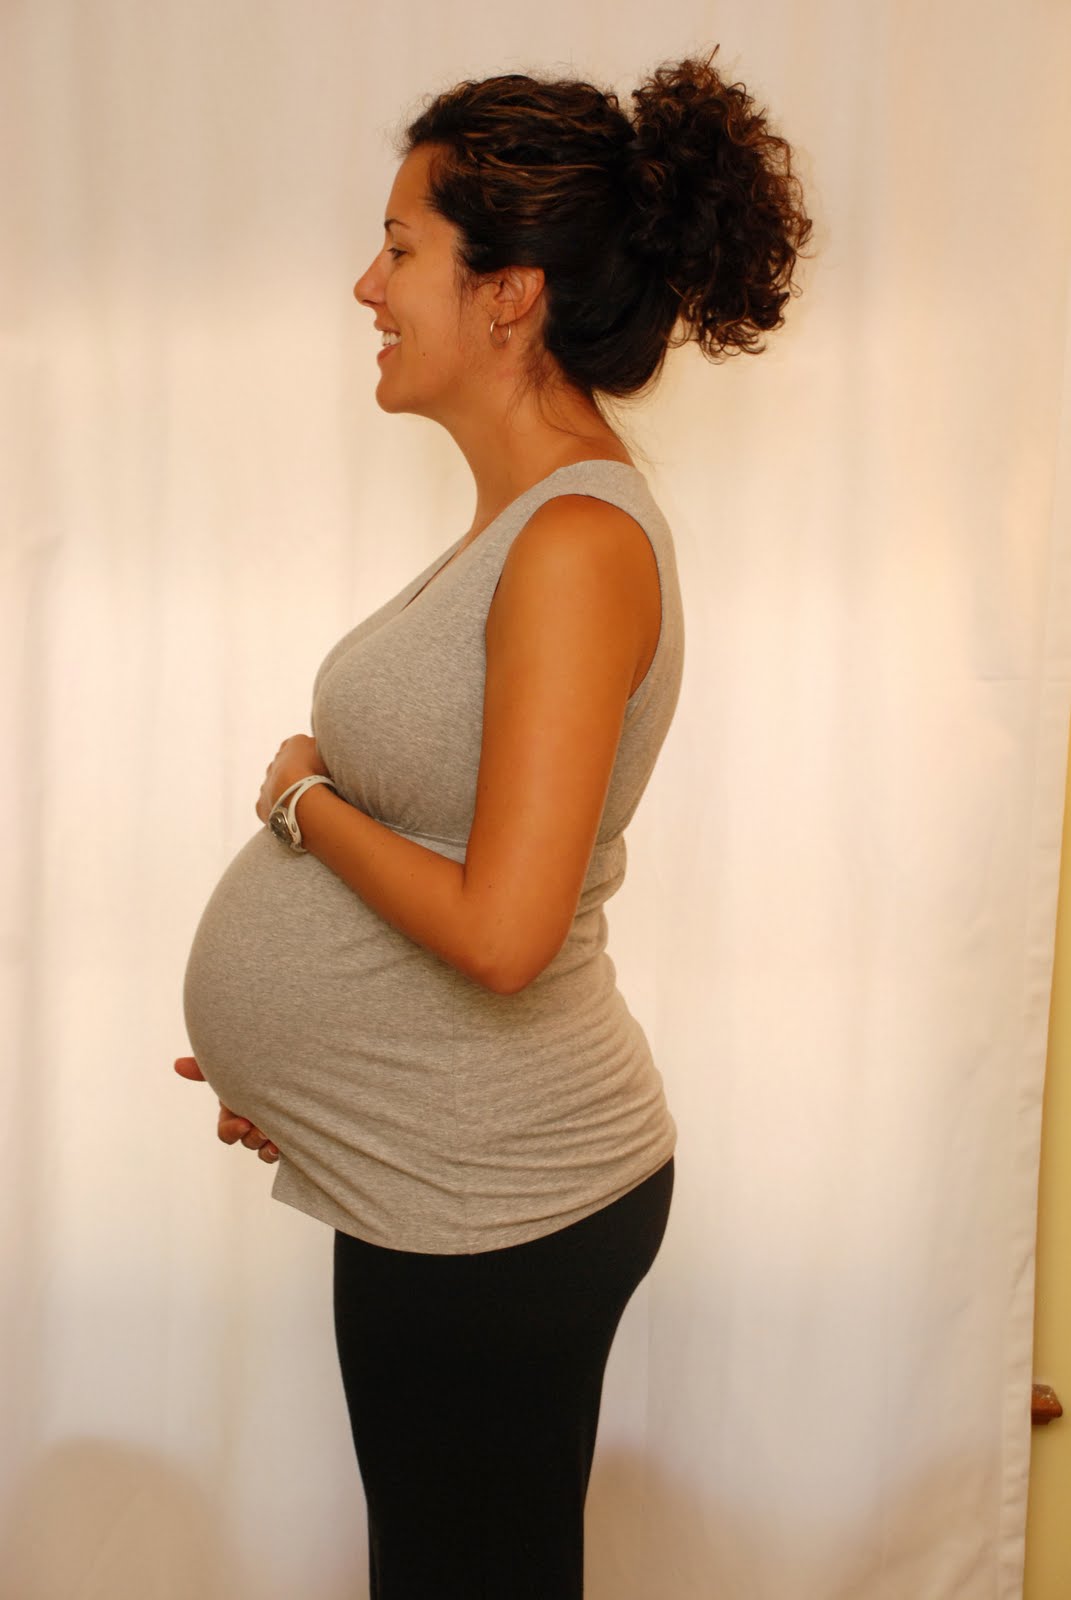 38 Weeks 2 Days Baby Development: Everything You Need to Know